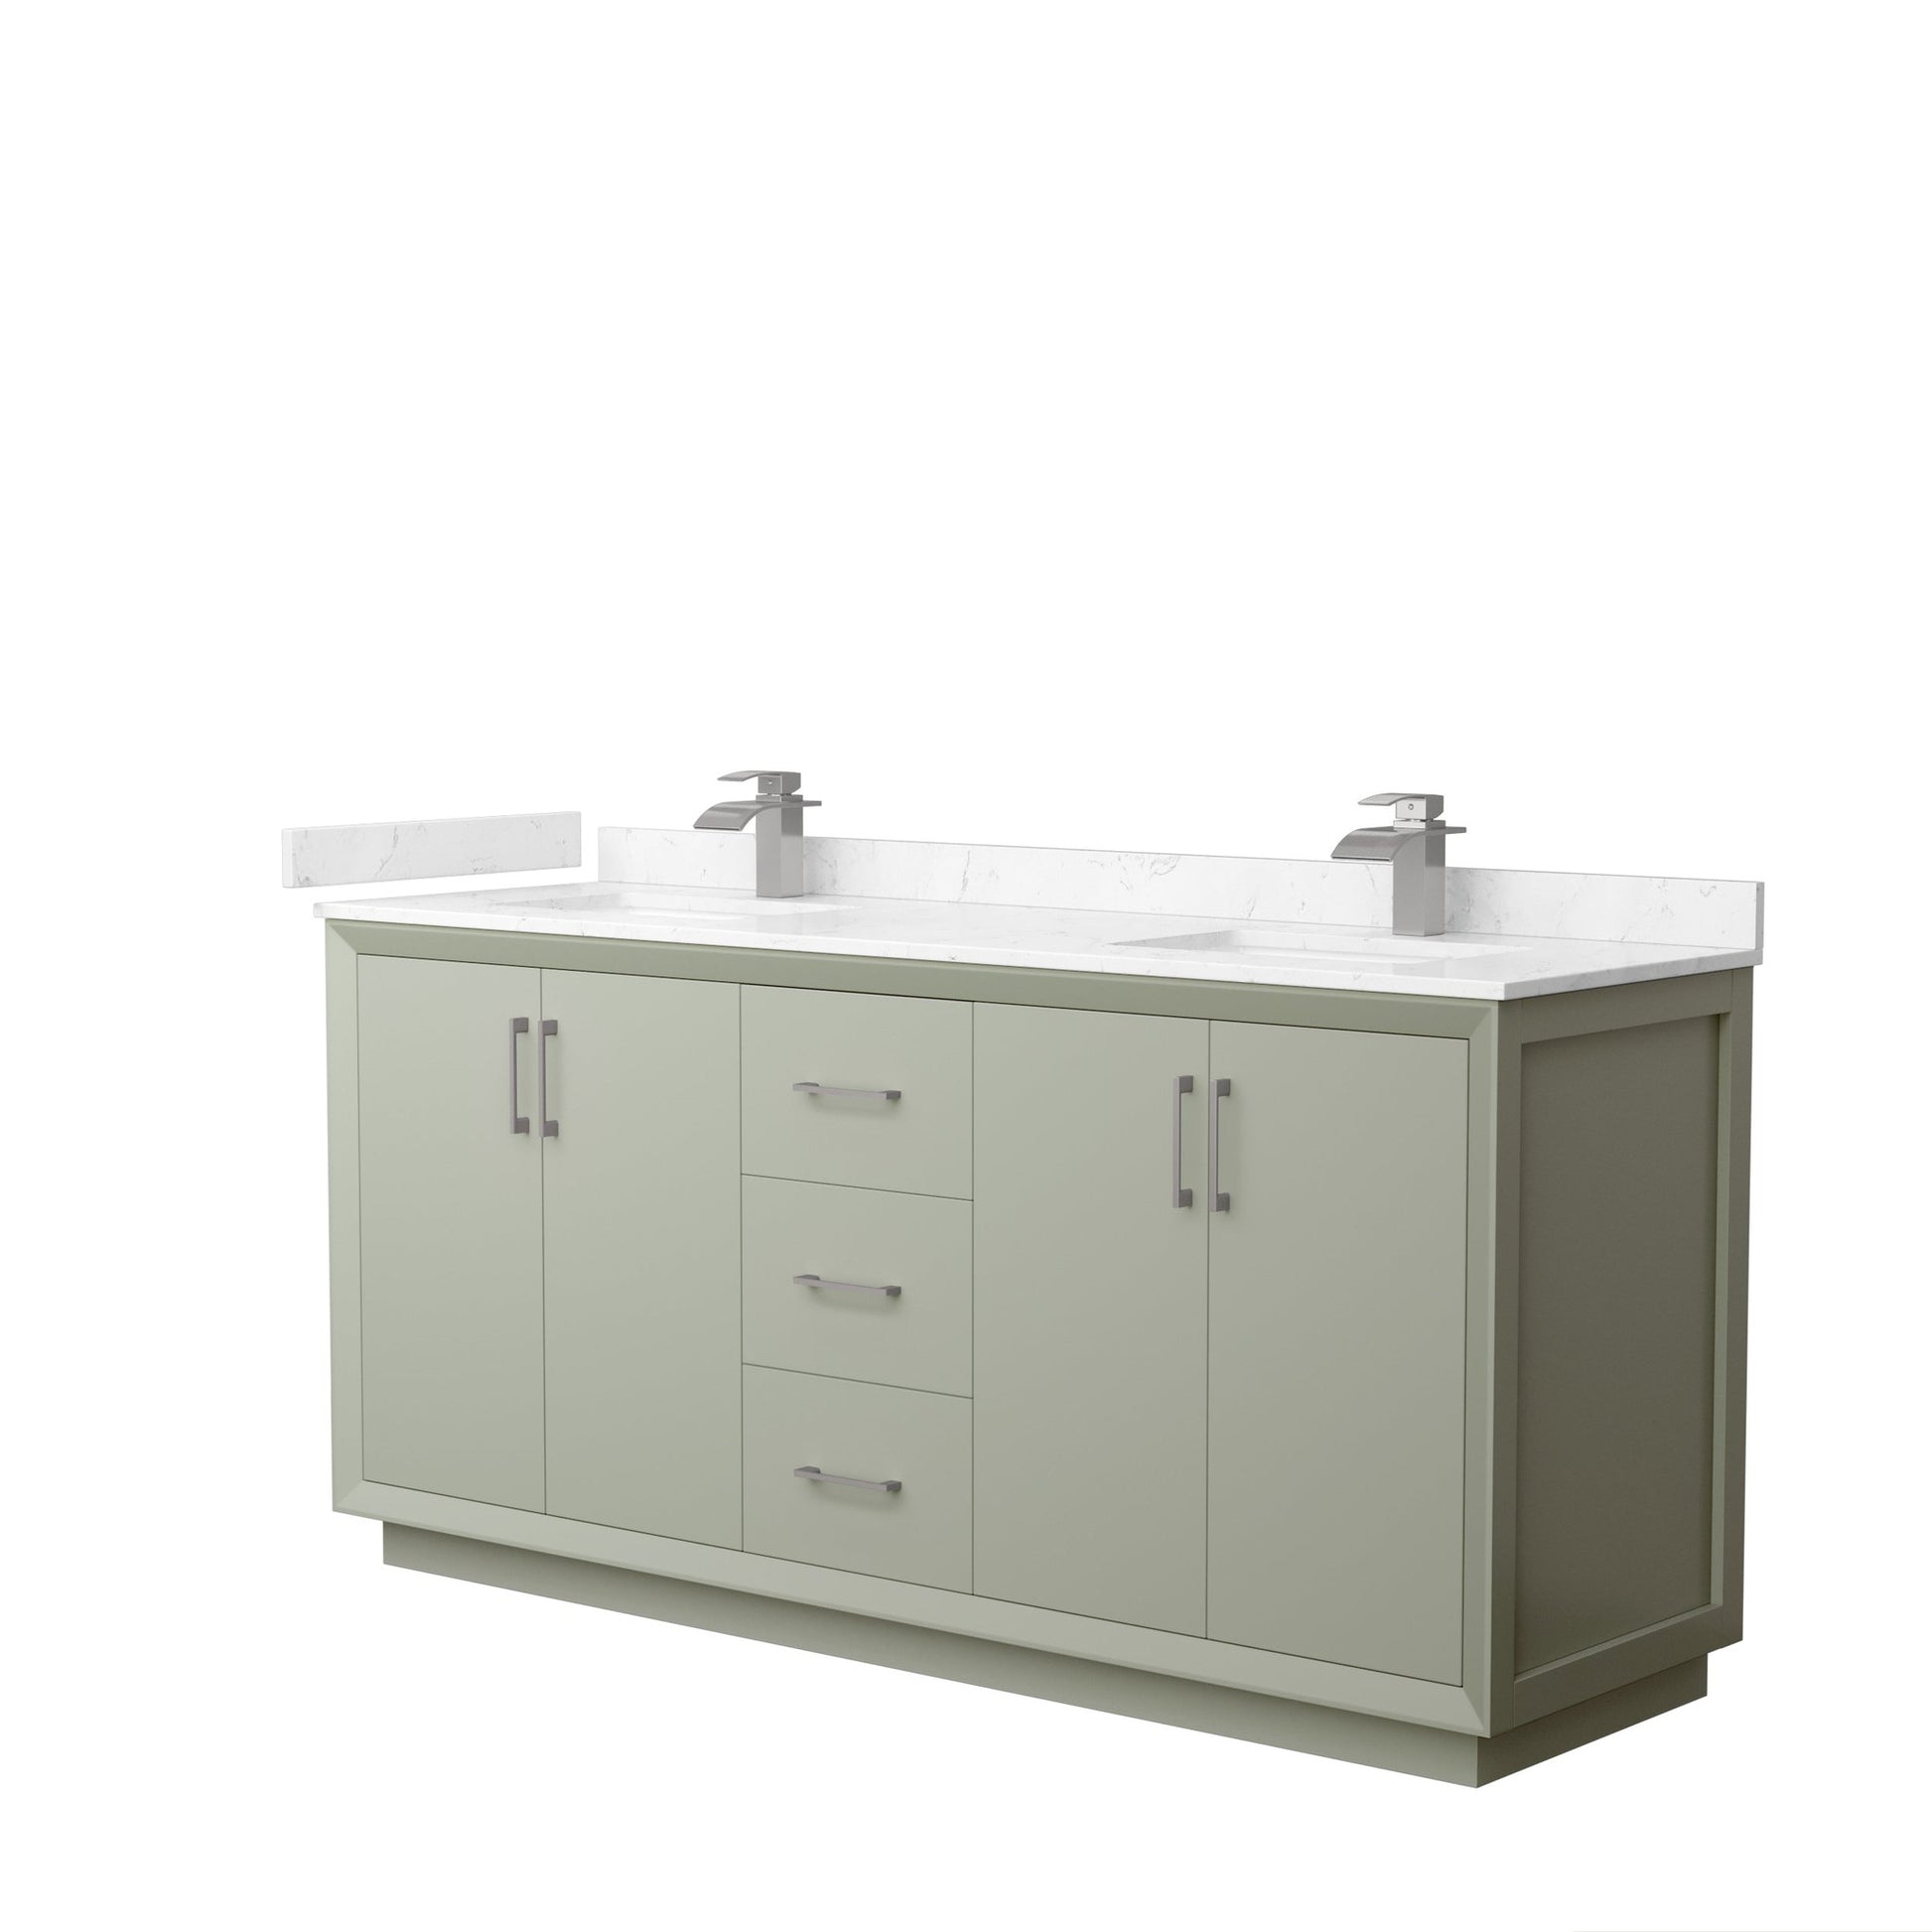 Wyndham Collection Strada 72" Double Bathroom Vanity in Light Green, Carrara Cultured Marble Countertop, Undermount Square Sinks, Brushed Nickel Trim